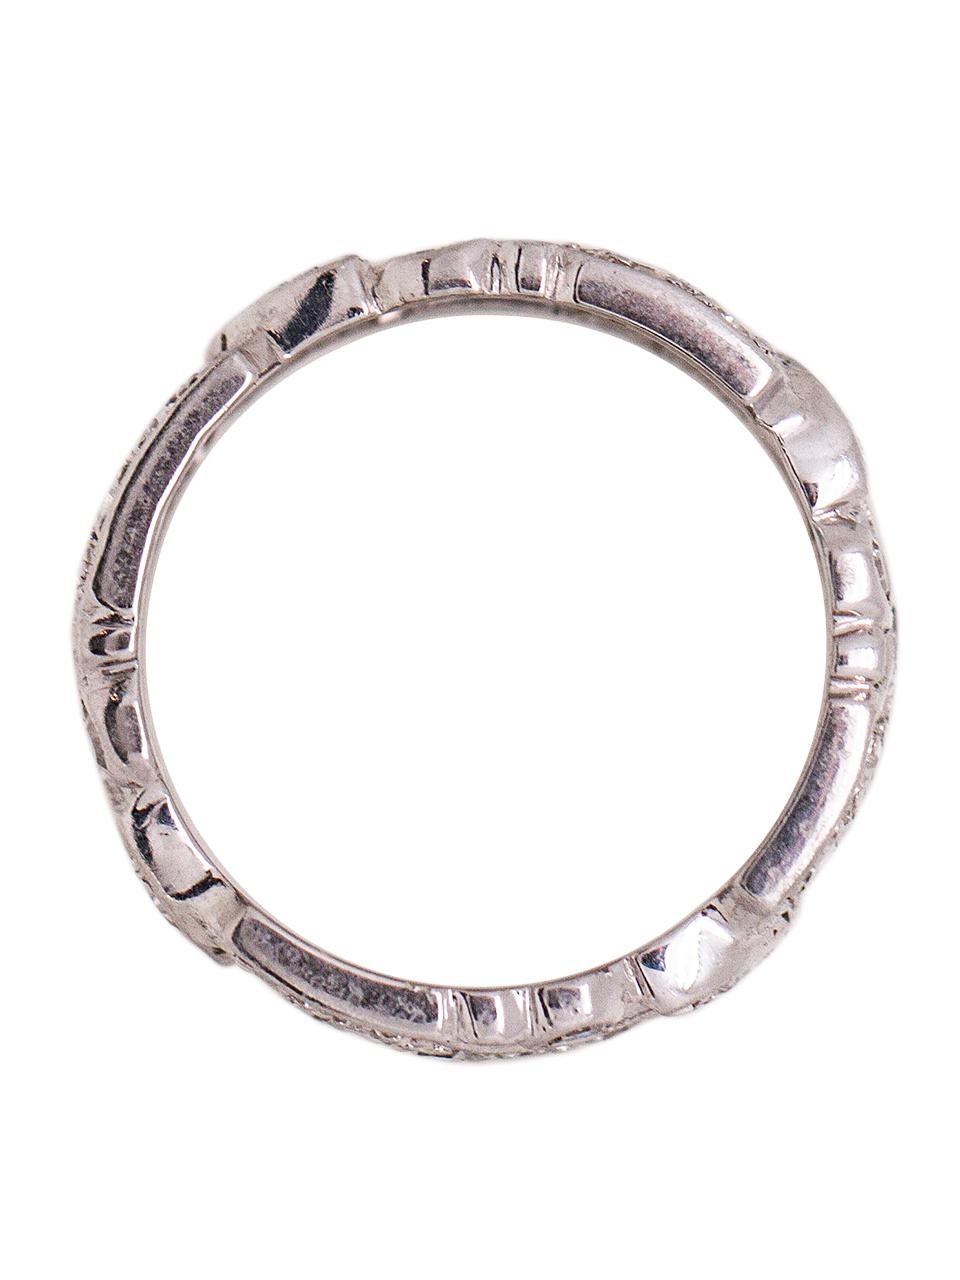 Round Cut Vintage Platinum and Diamond Wide Band 0.25 Carat, circa 1940s For Sale